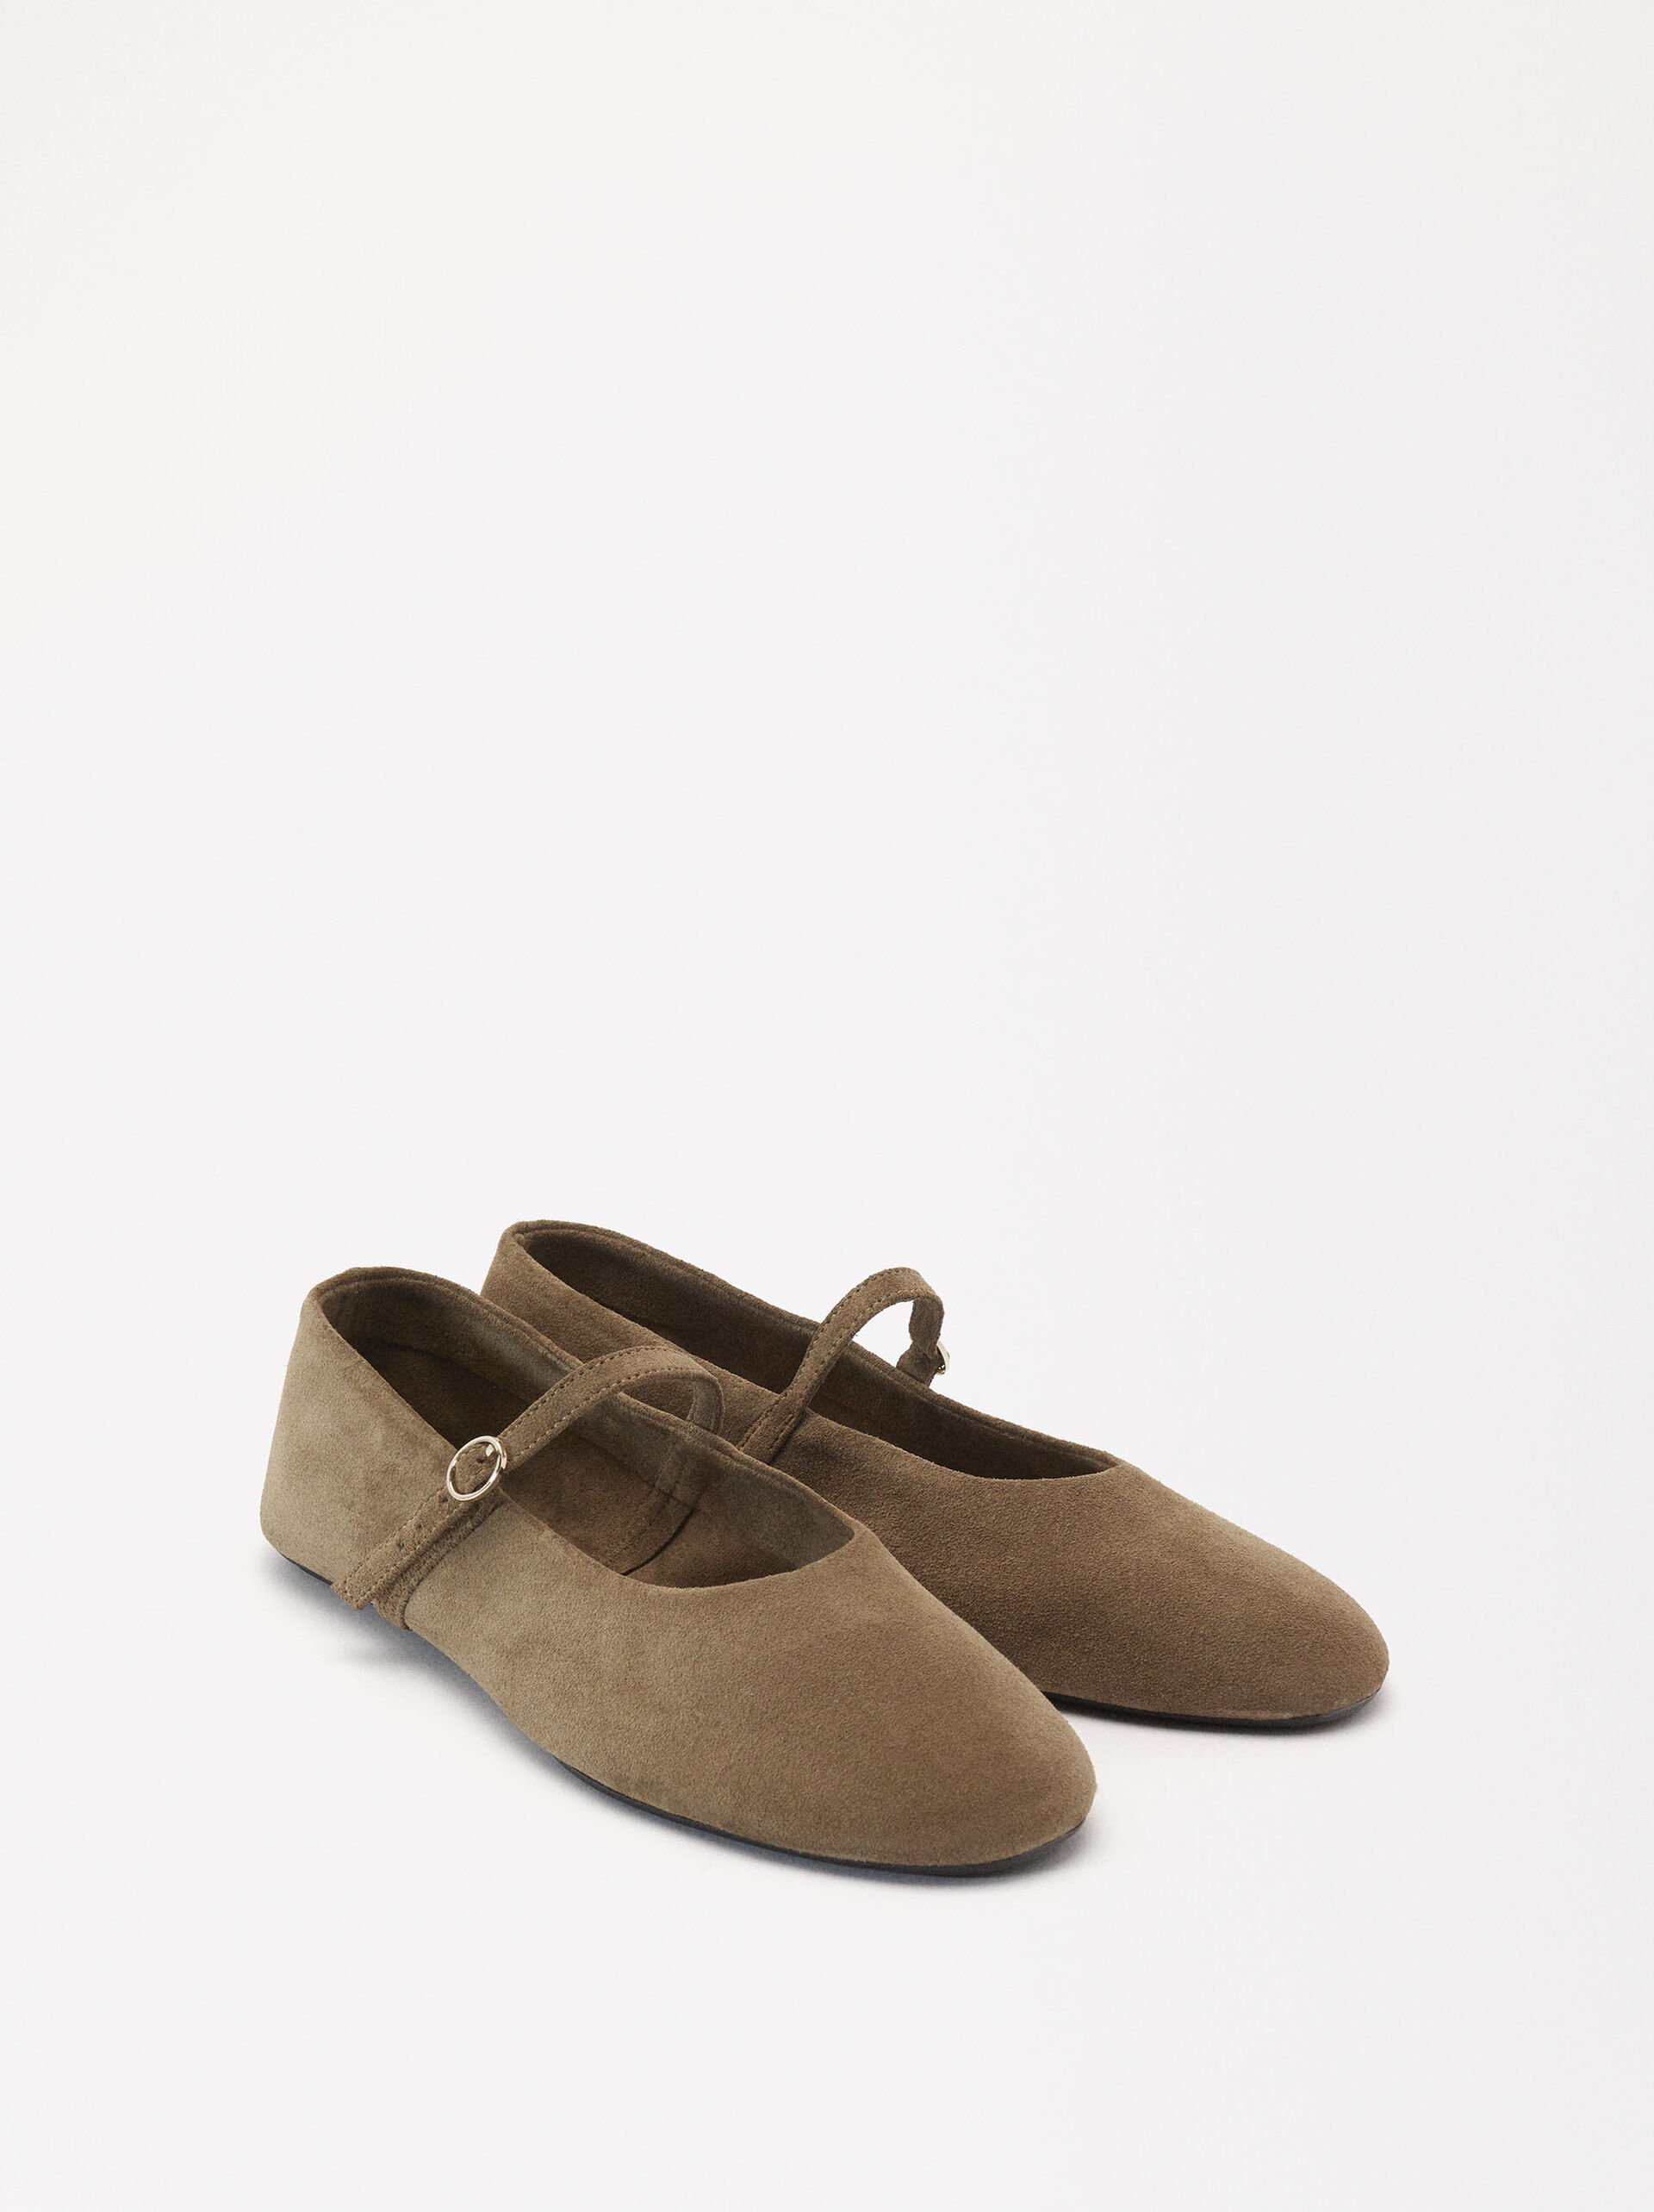 Suede Leather Ballerinas image number 3.0